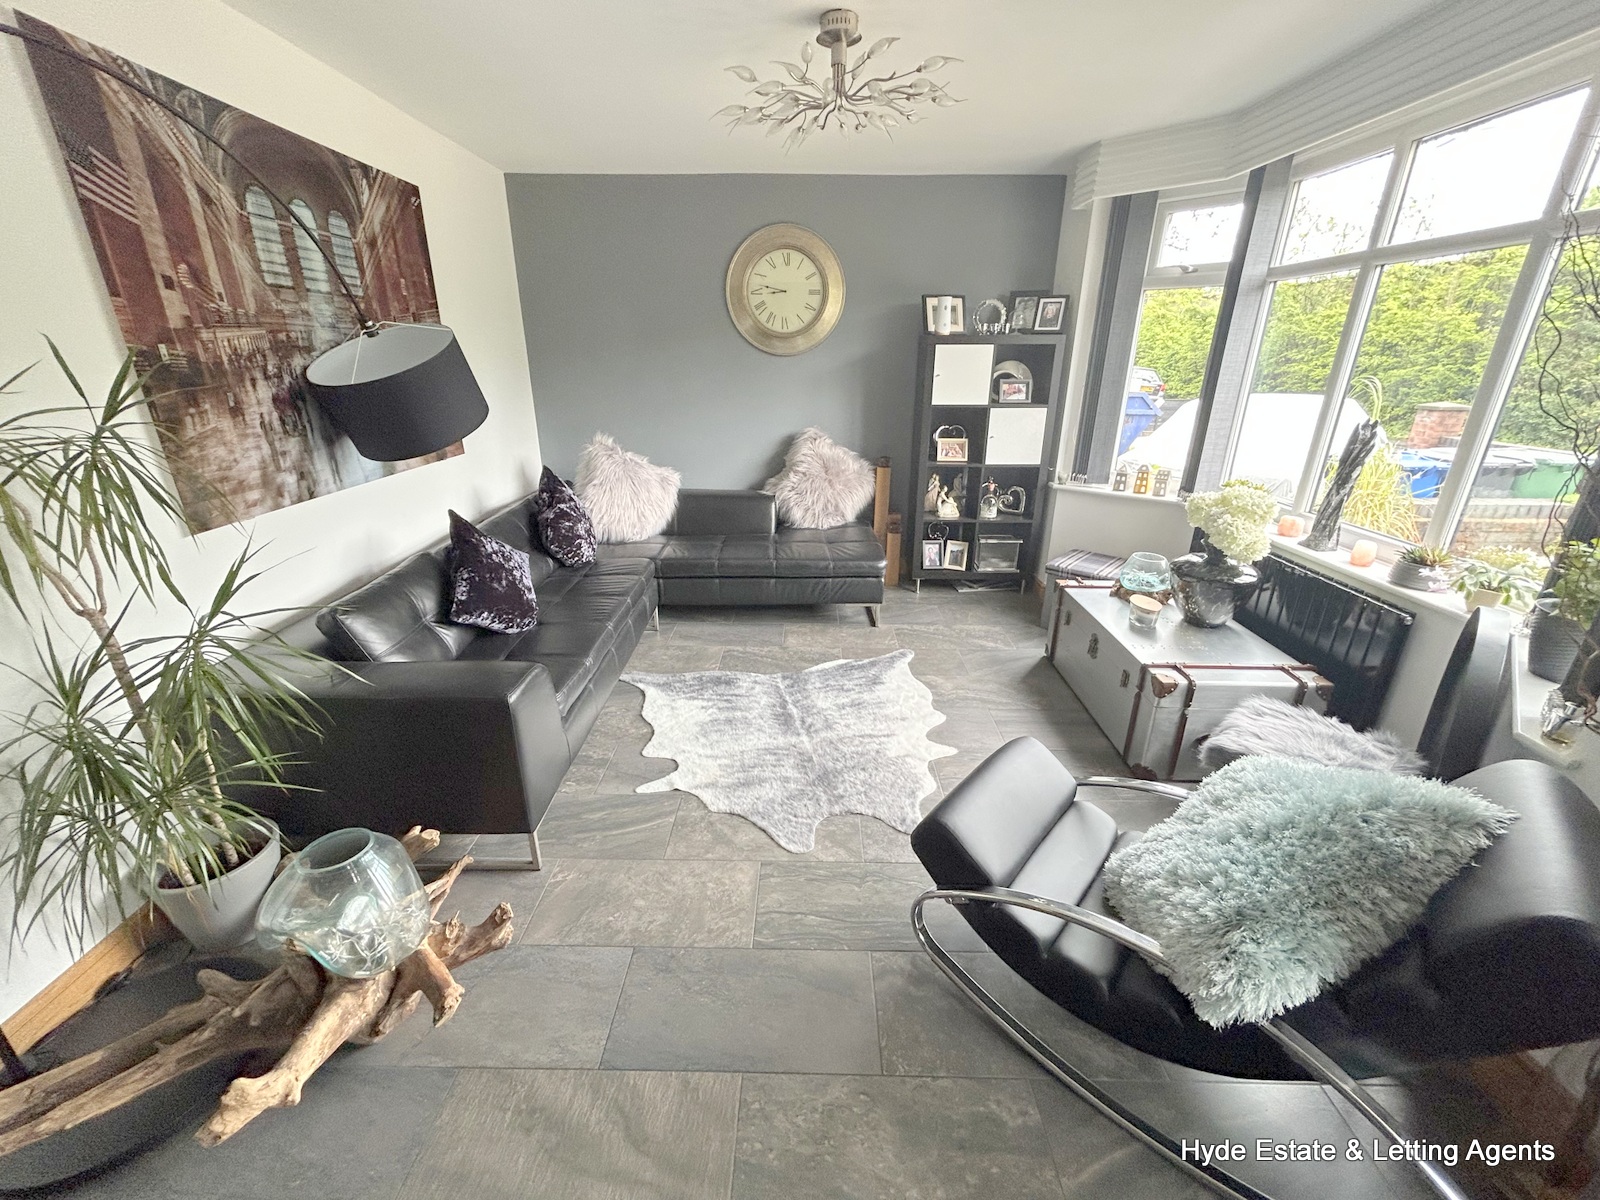 Images for Balmoral Avenue, Whitefield, Manchester, M45 6BB